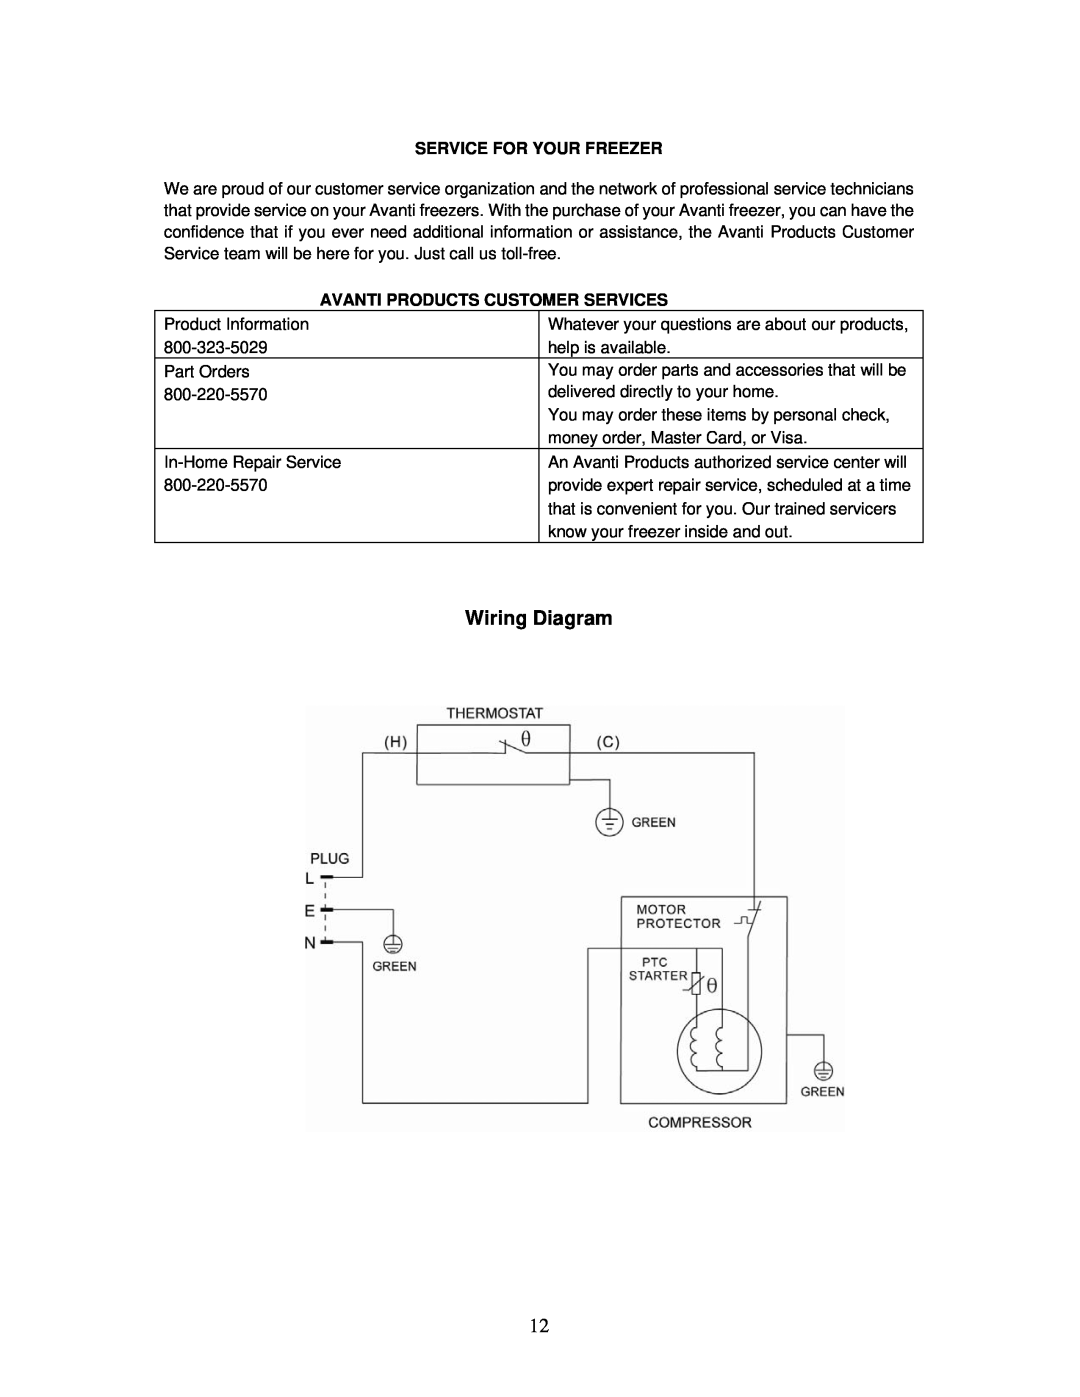 Avanti VM302W instruction manual Wiring Diagram, Service For Your Freezer, Avanti Products Customer Services 